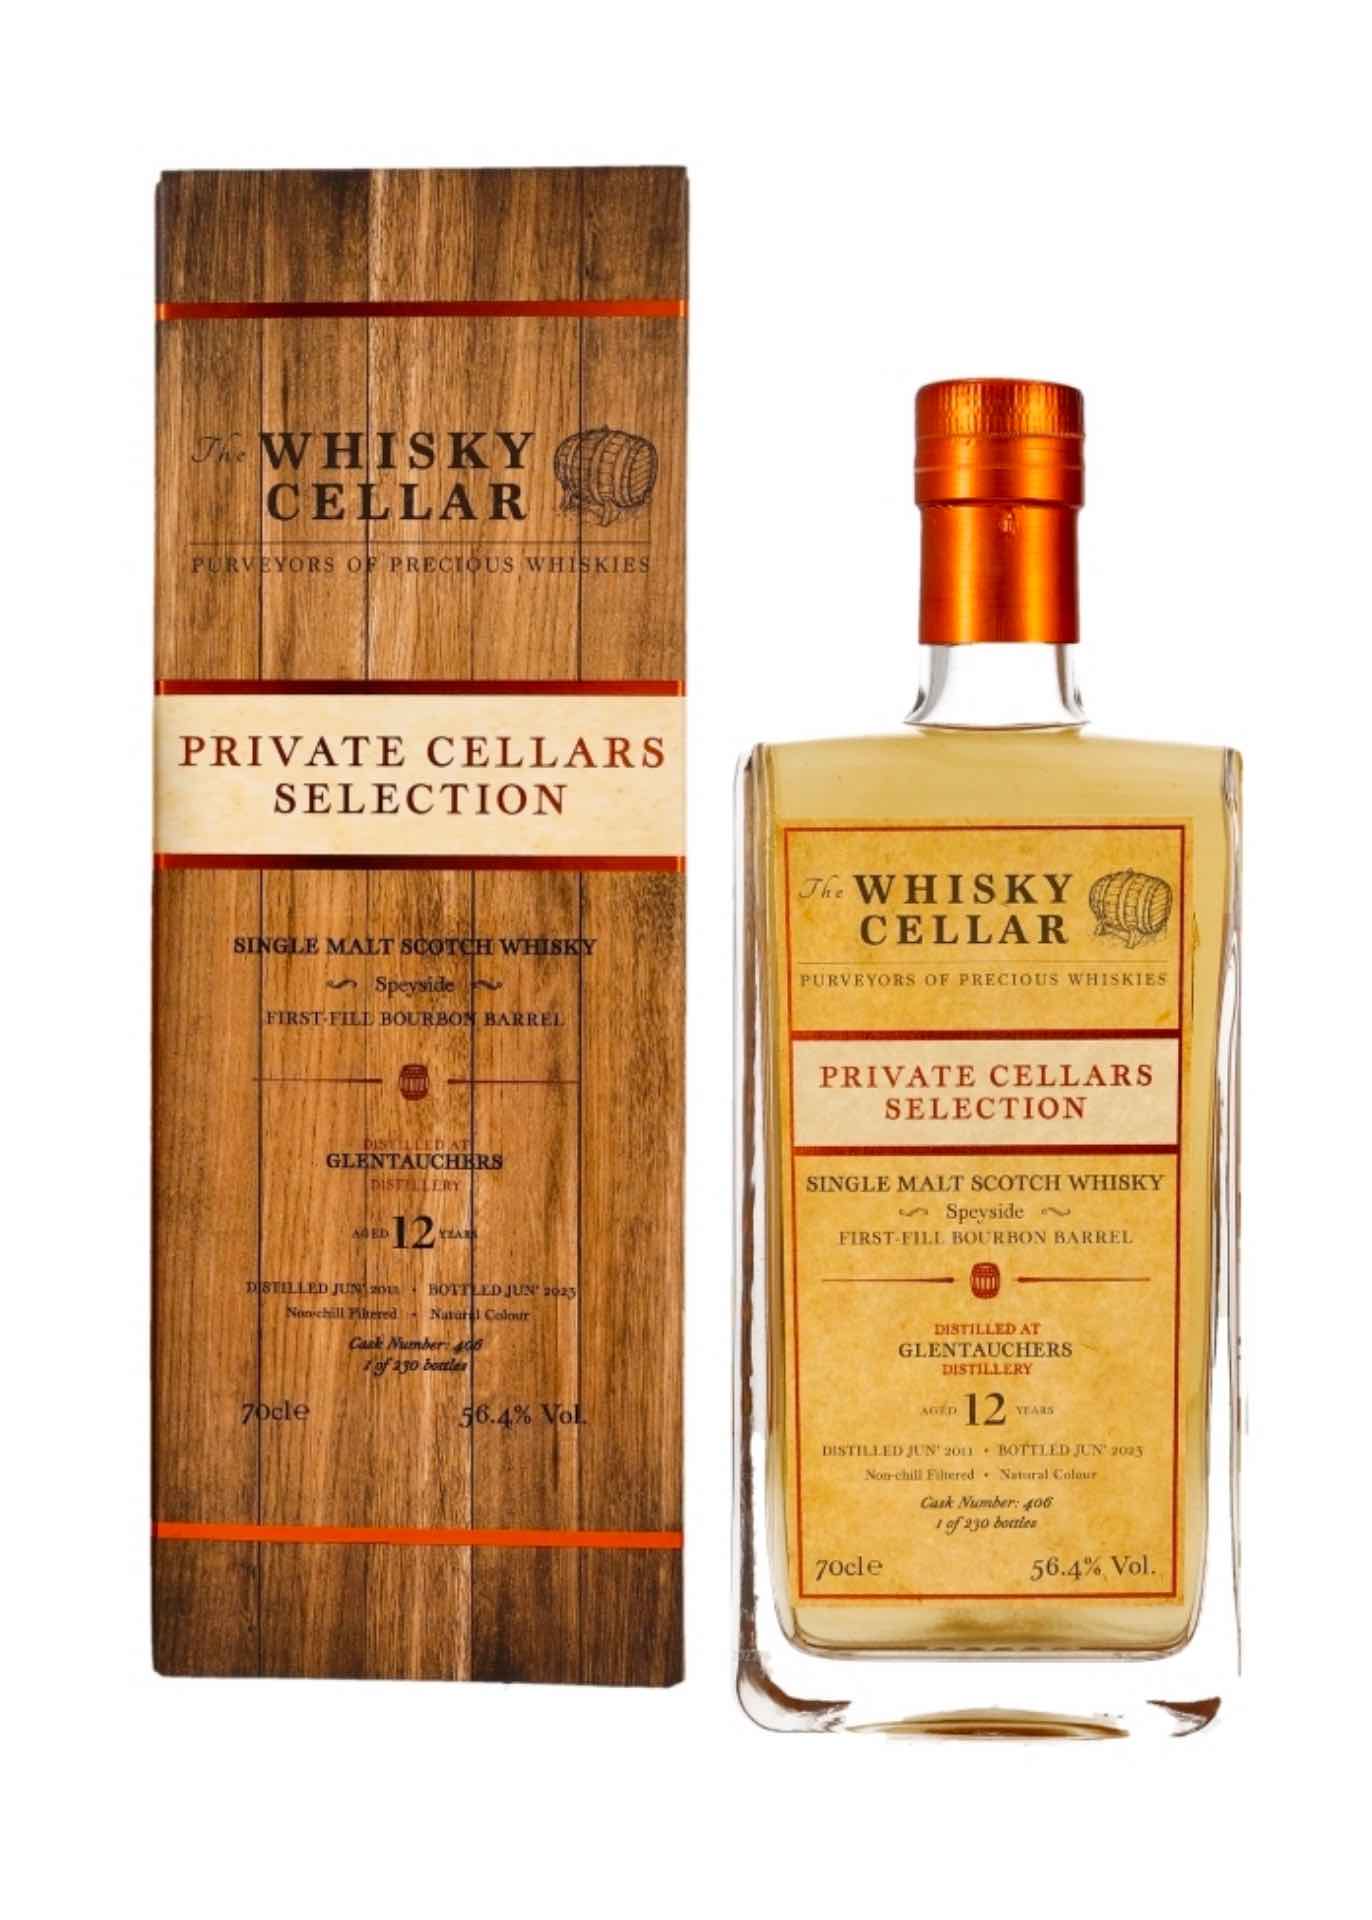 The Whisky Cellar Glentauchers 12 Year Old First Fill Bourbon